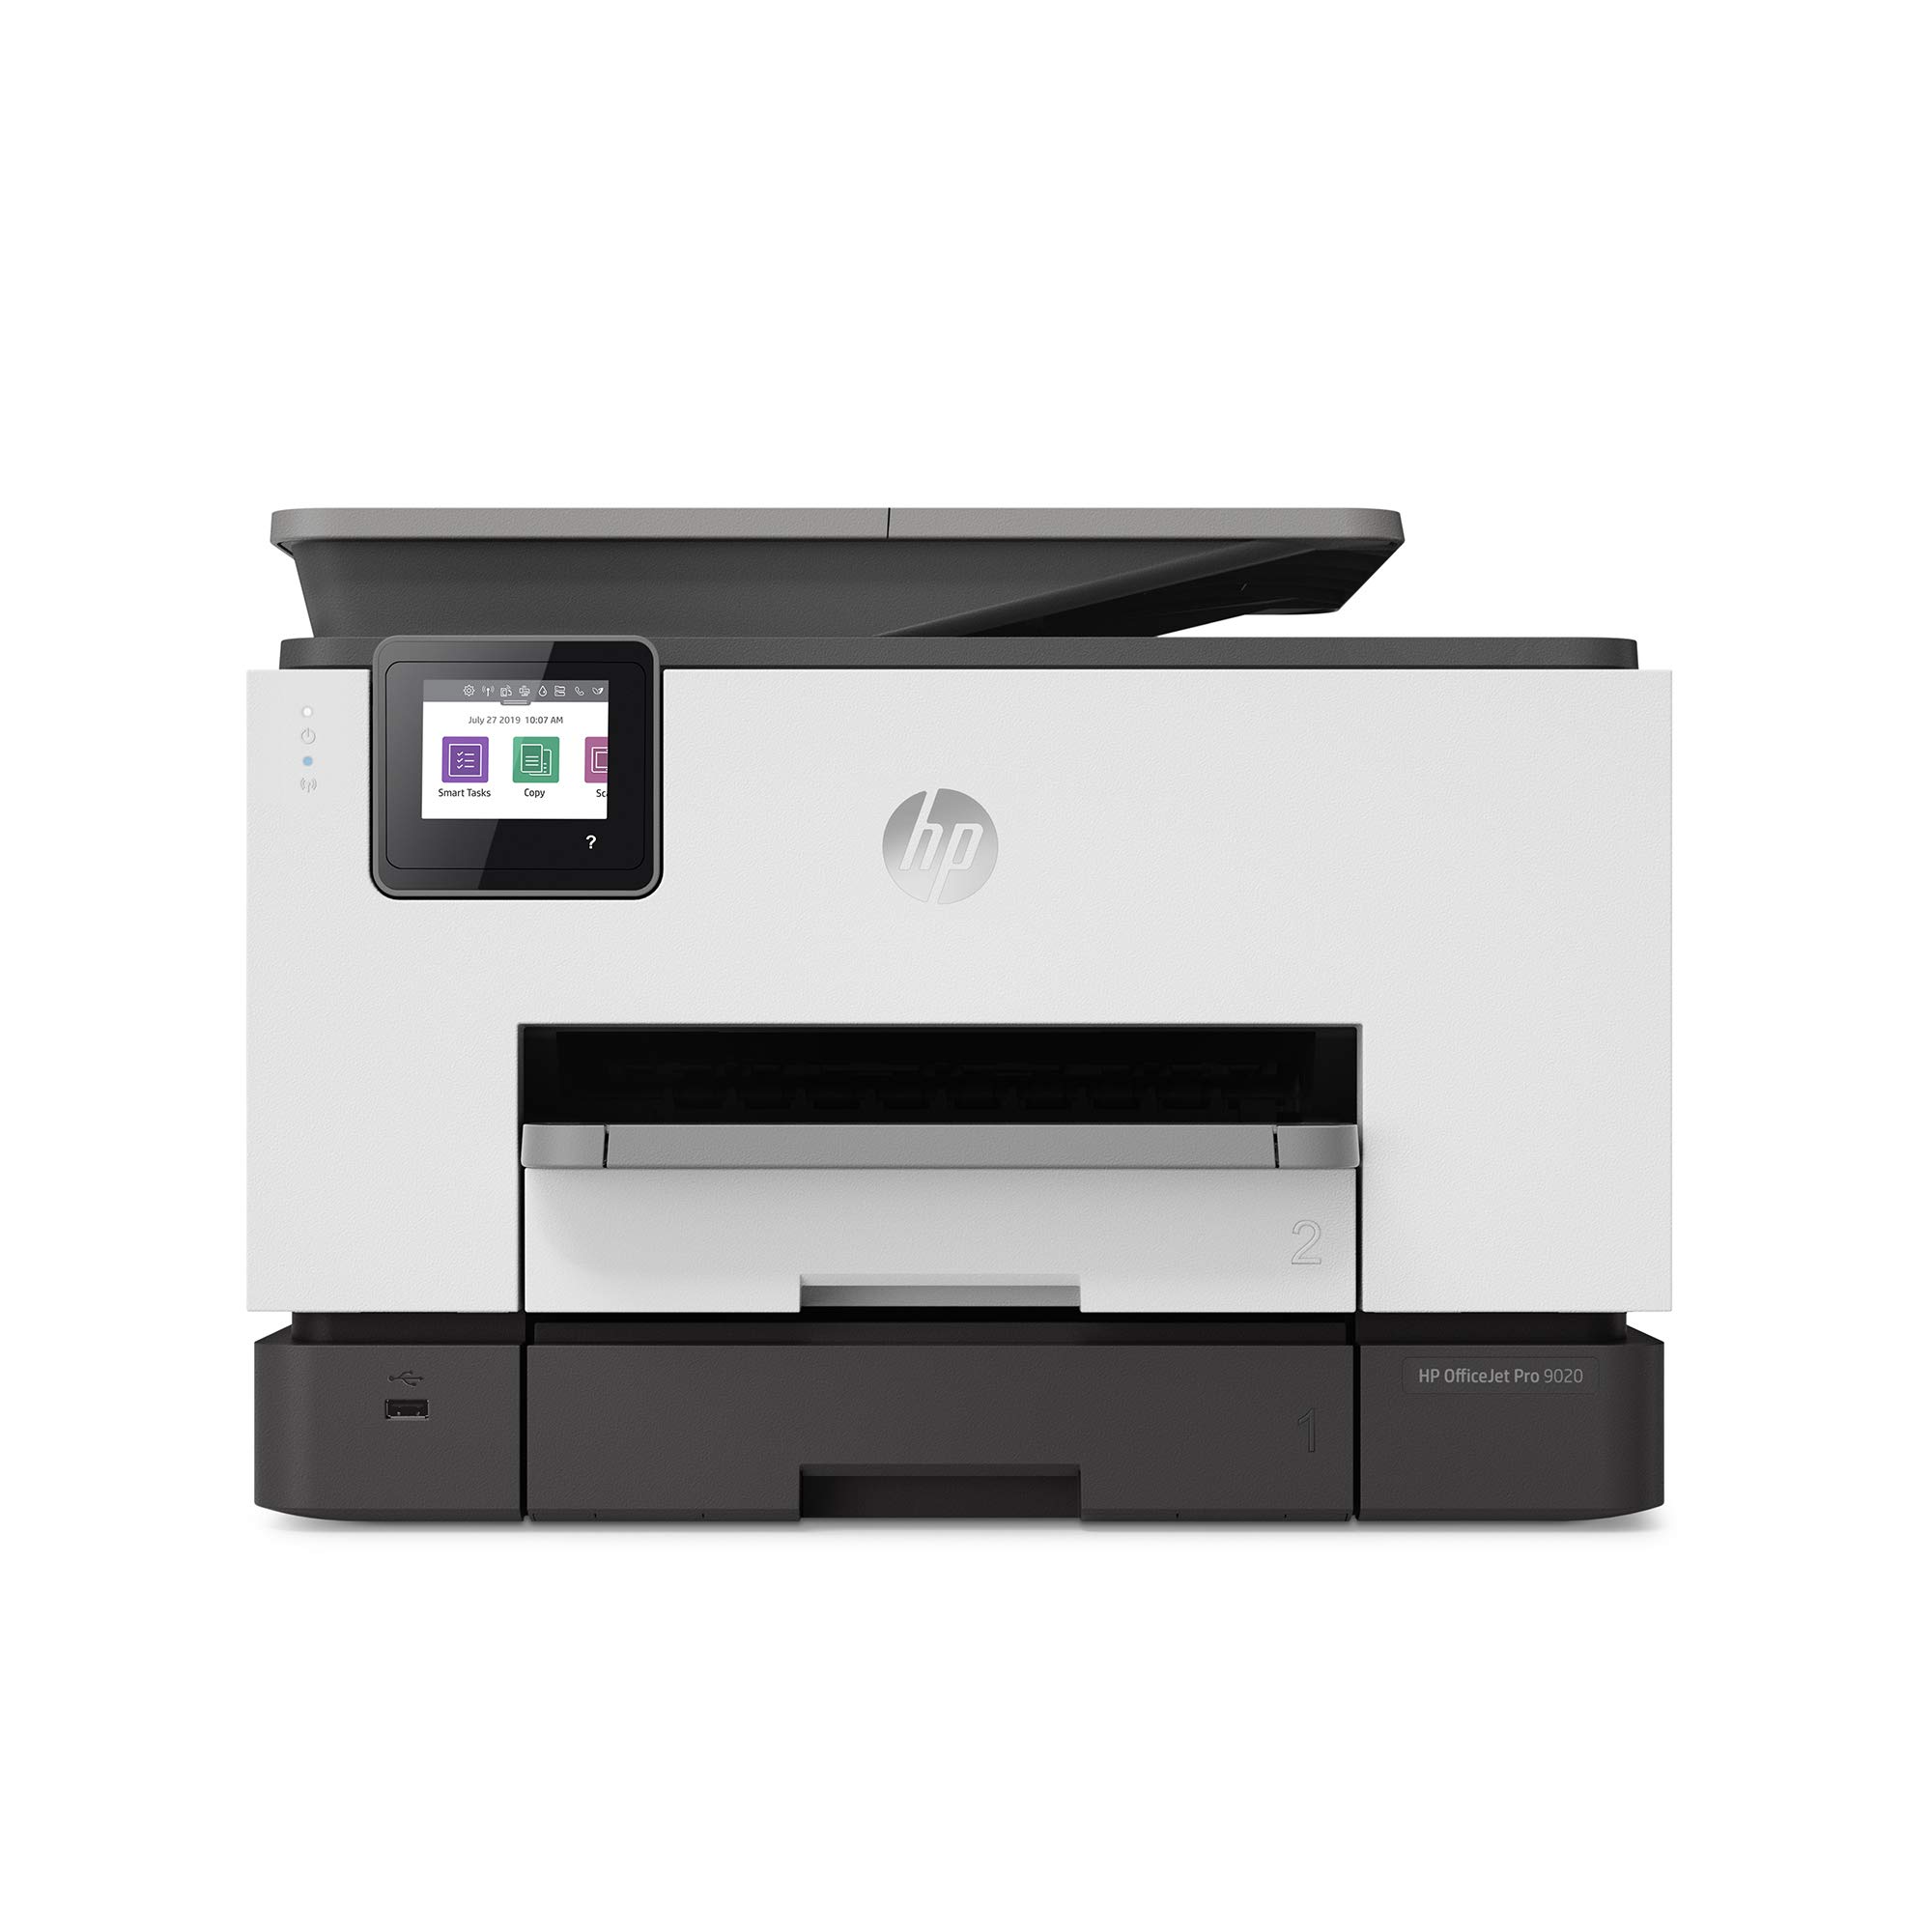 OfficeJet Pro 9020 All-in-One Printer series